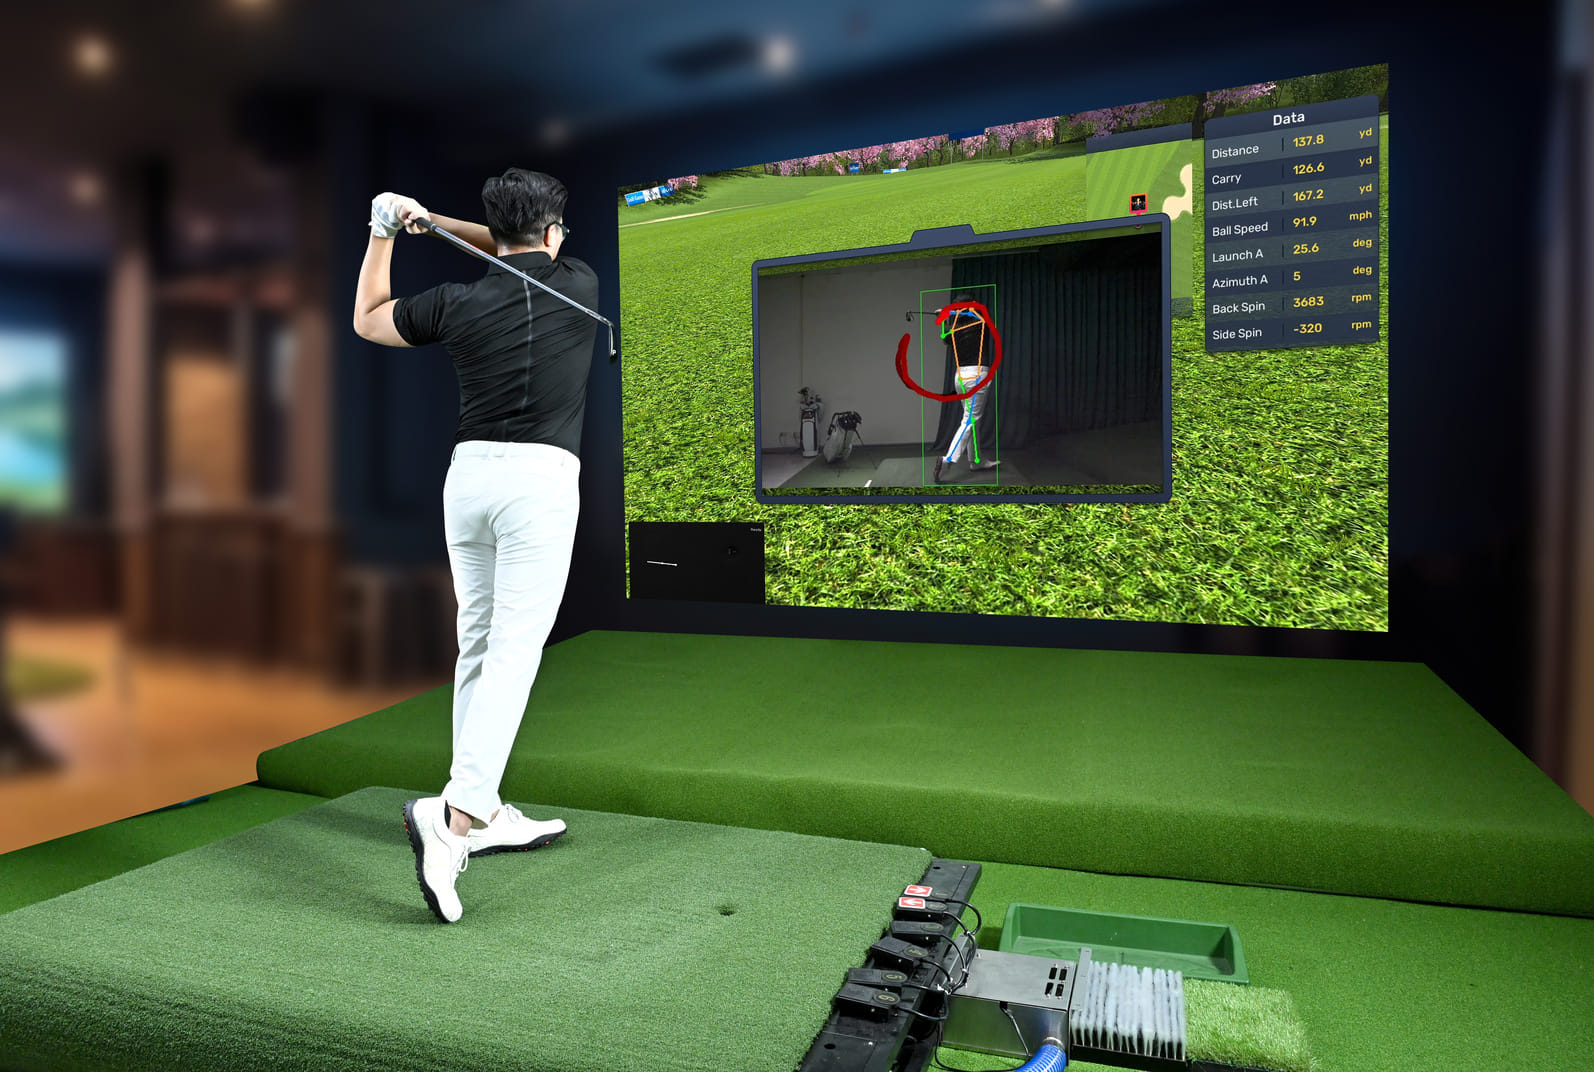 Players can analyze their swing posture and body stance using iGolfPutter.